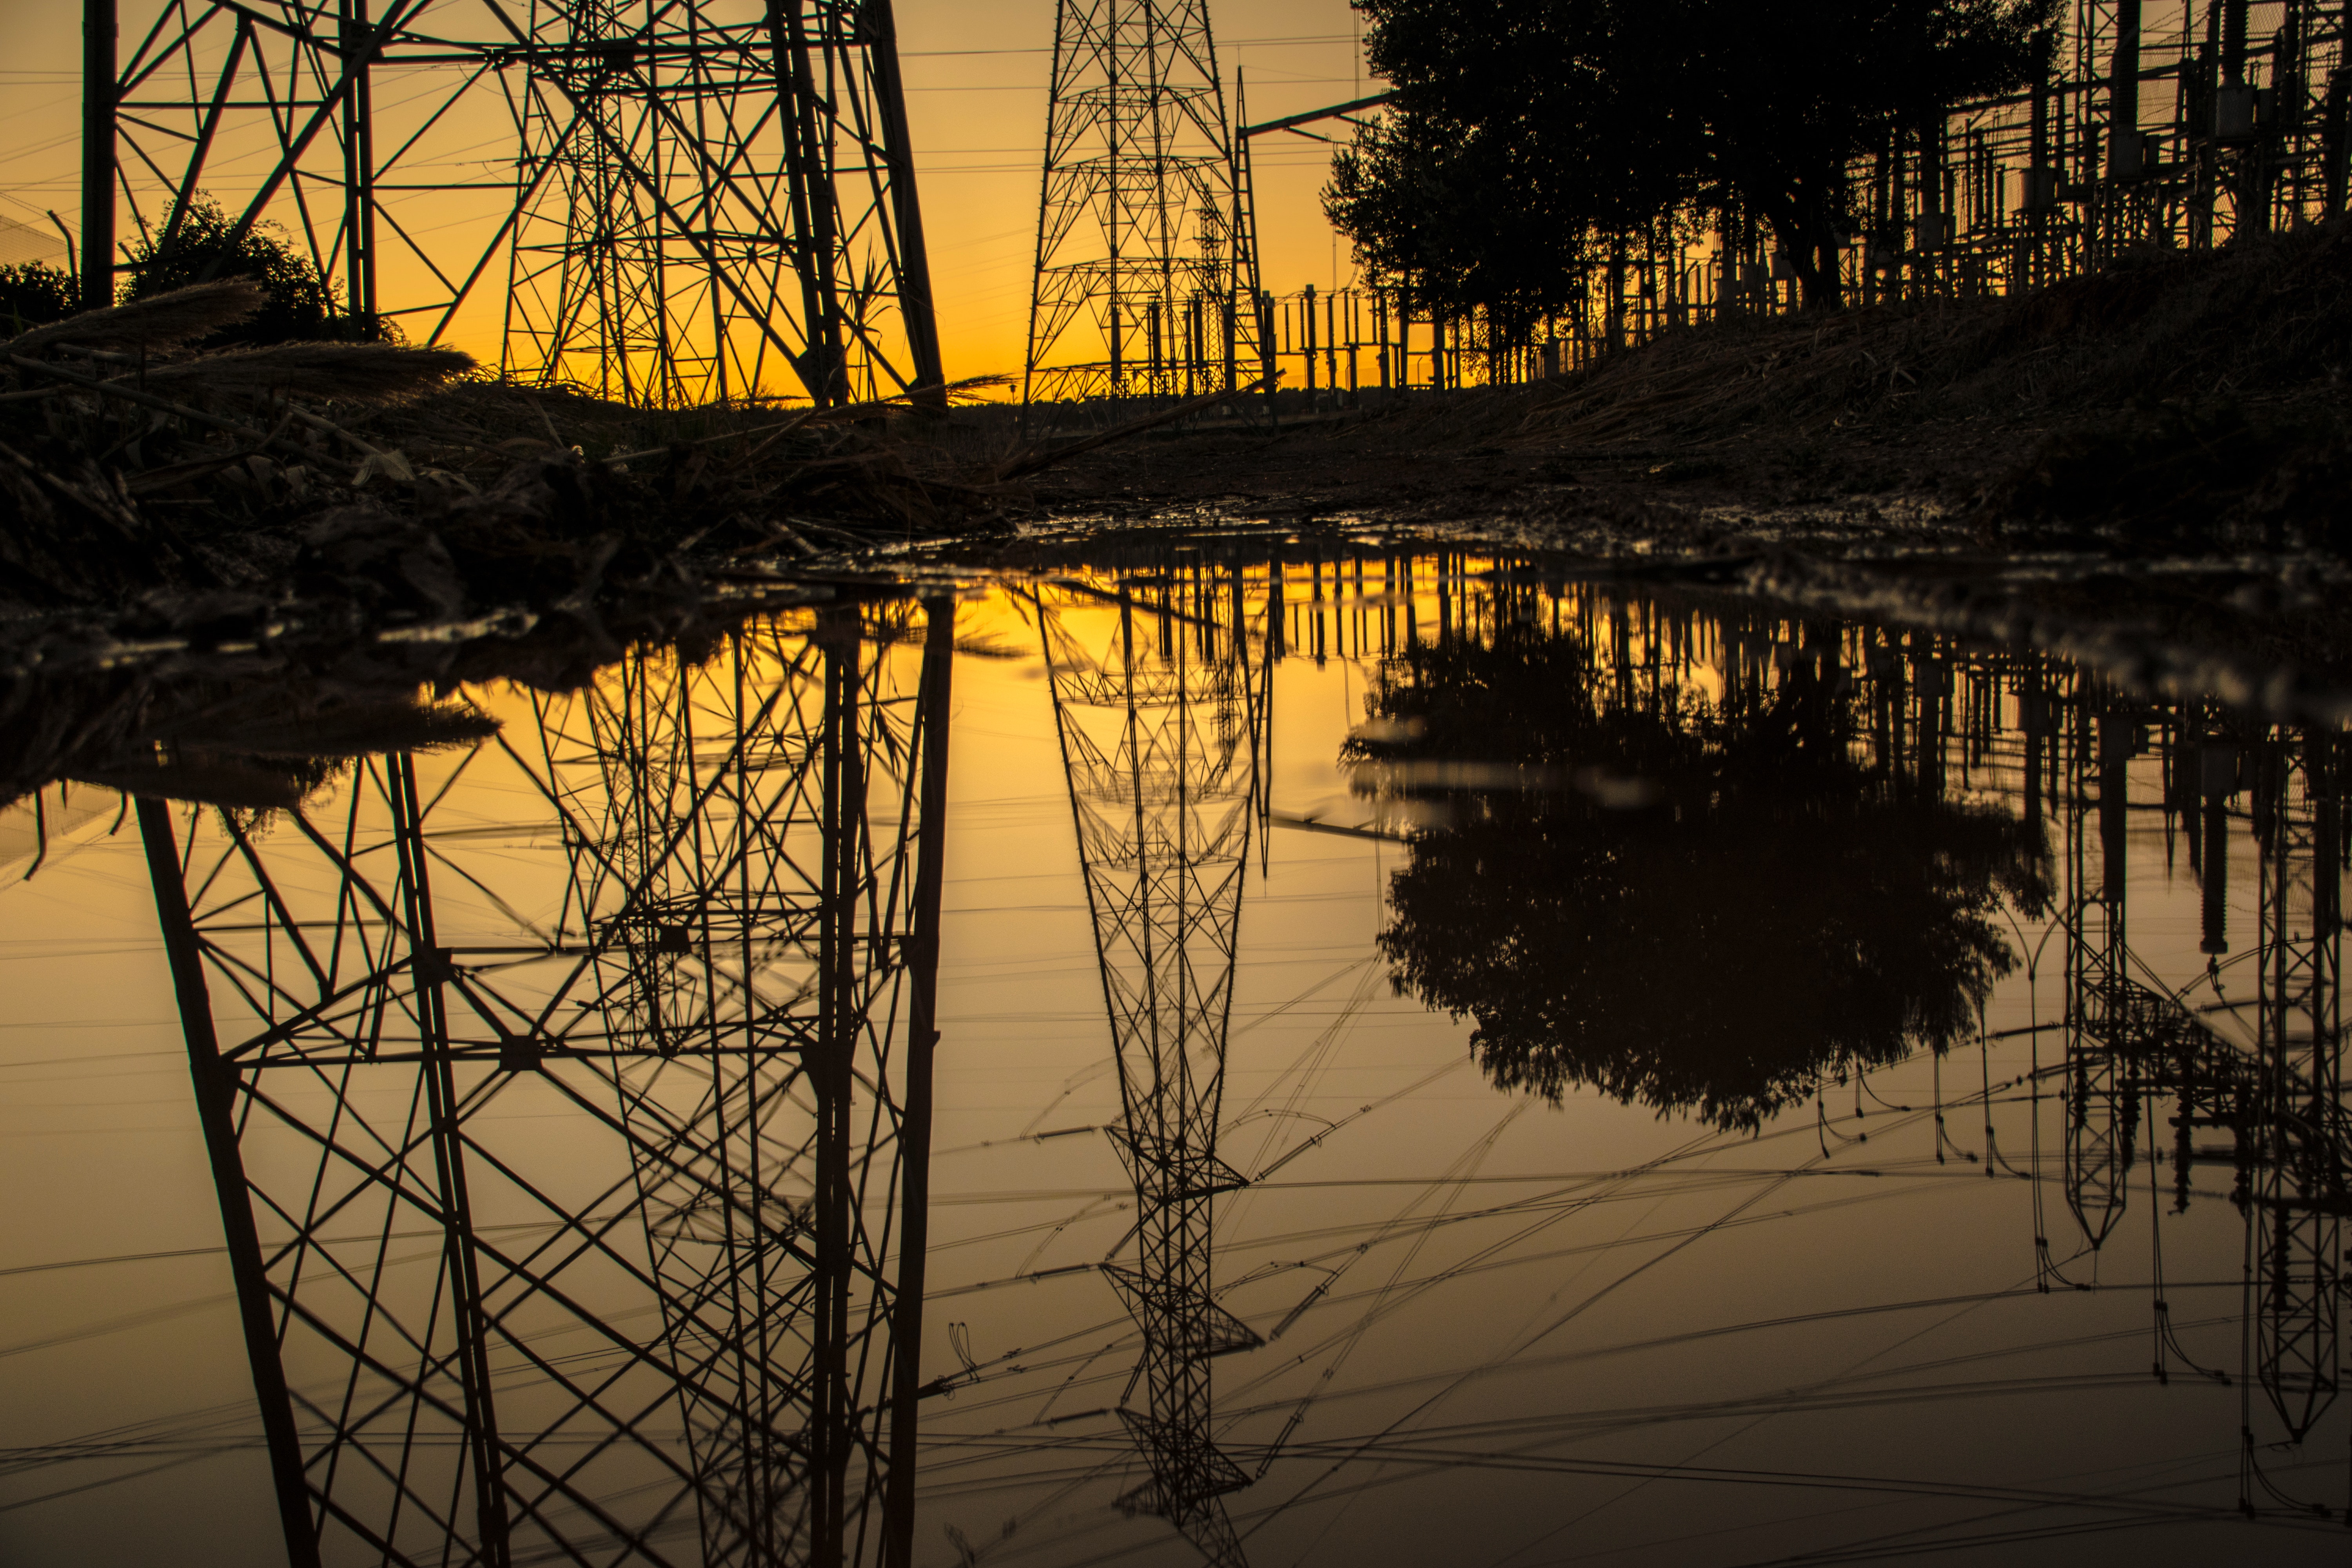 Silhouette of trees and electric tower reflecting on body of water during sunset photo